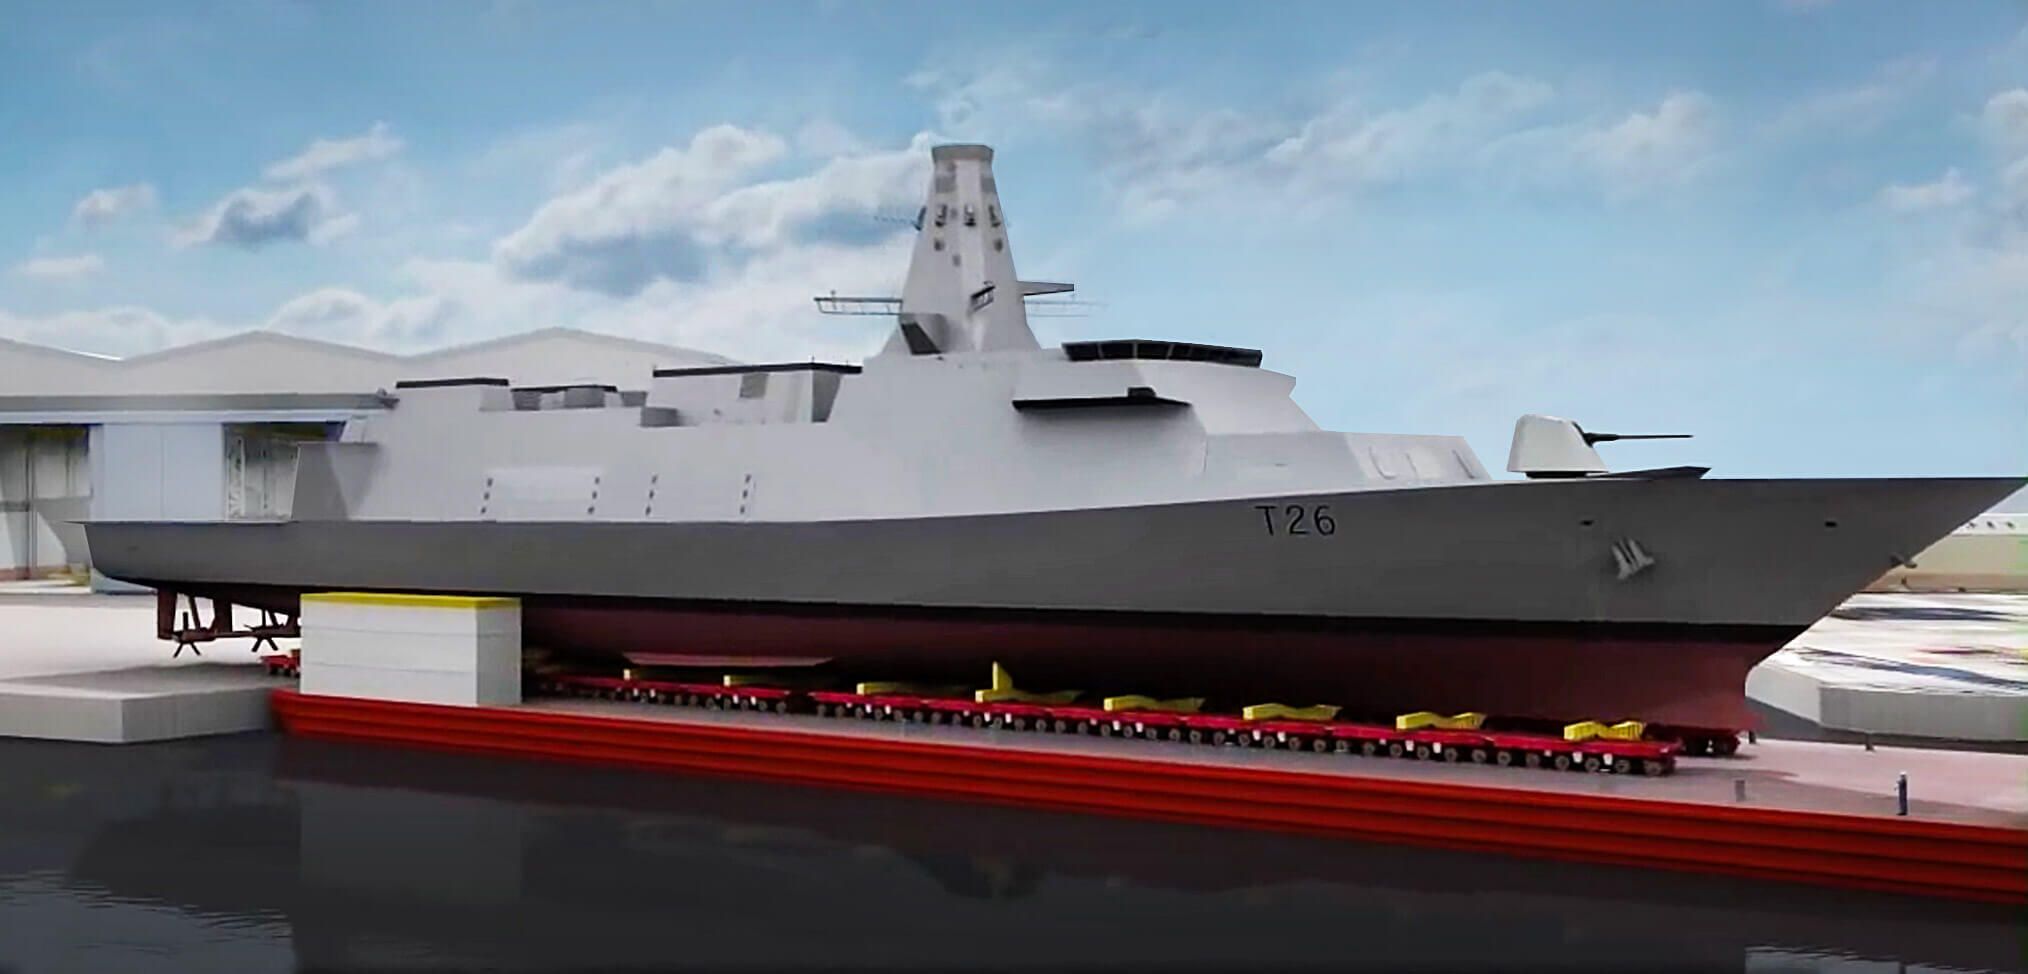 Type 26 Frigate to be armed with cruise/anti-ship missiles despite AUKUS